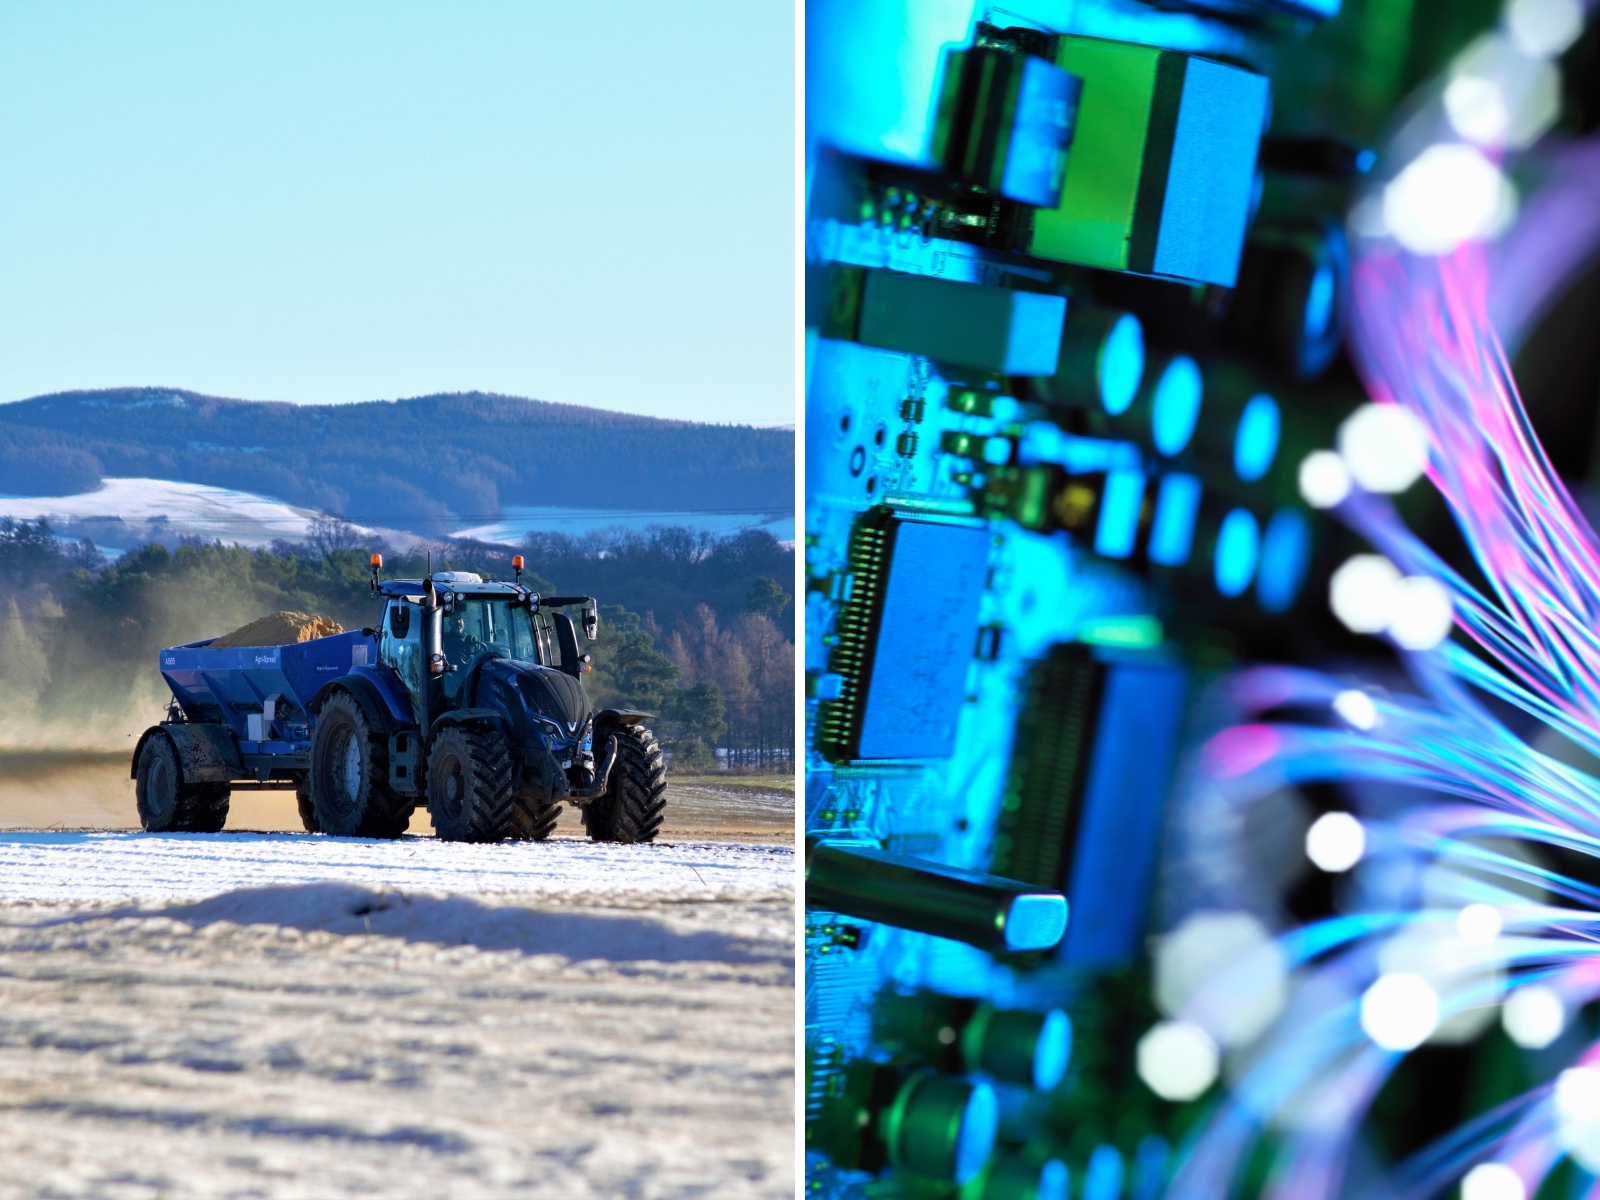 Split-screen of an Agri-spread tractor and some broadband wires.